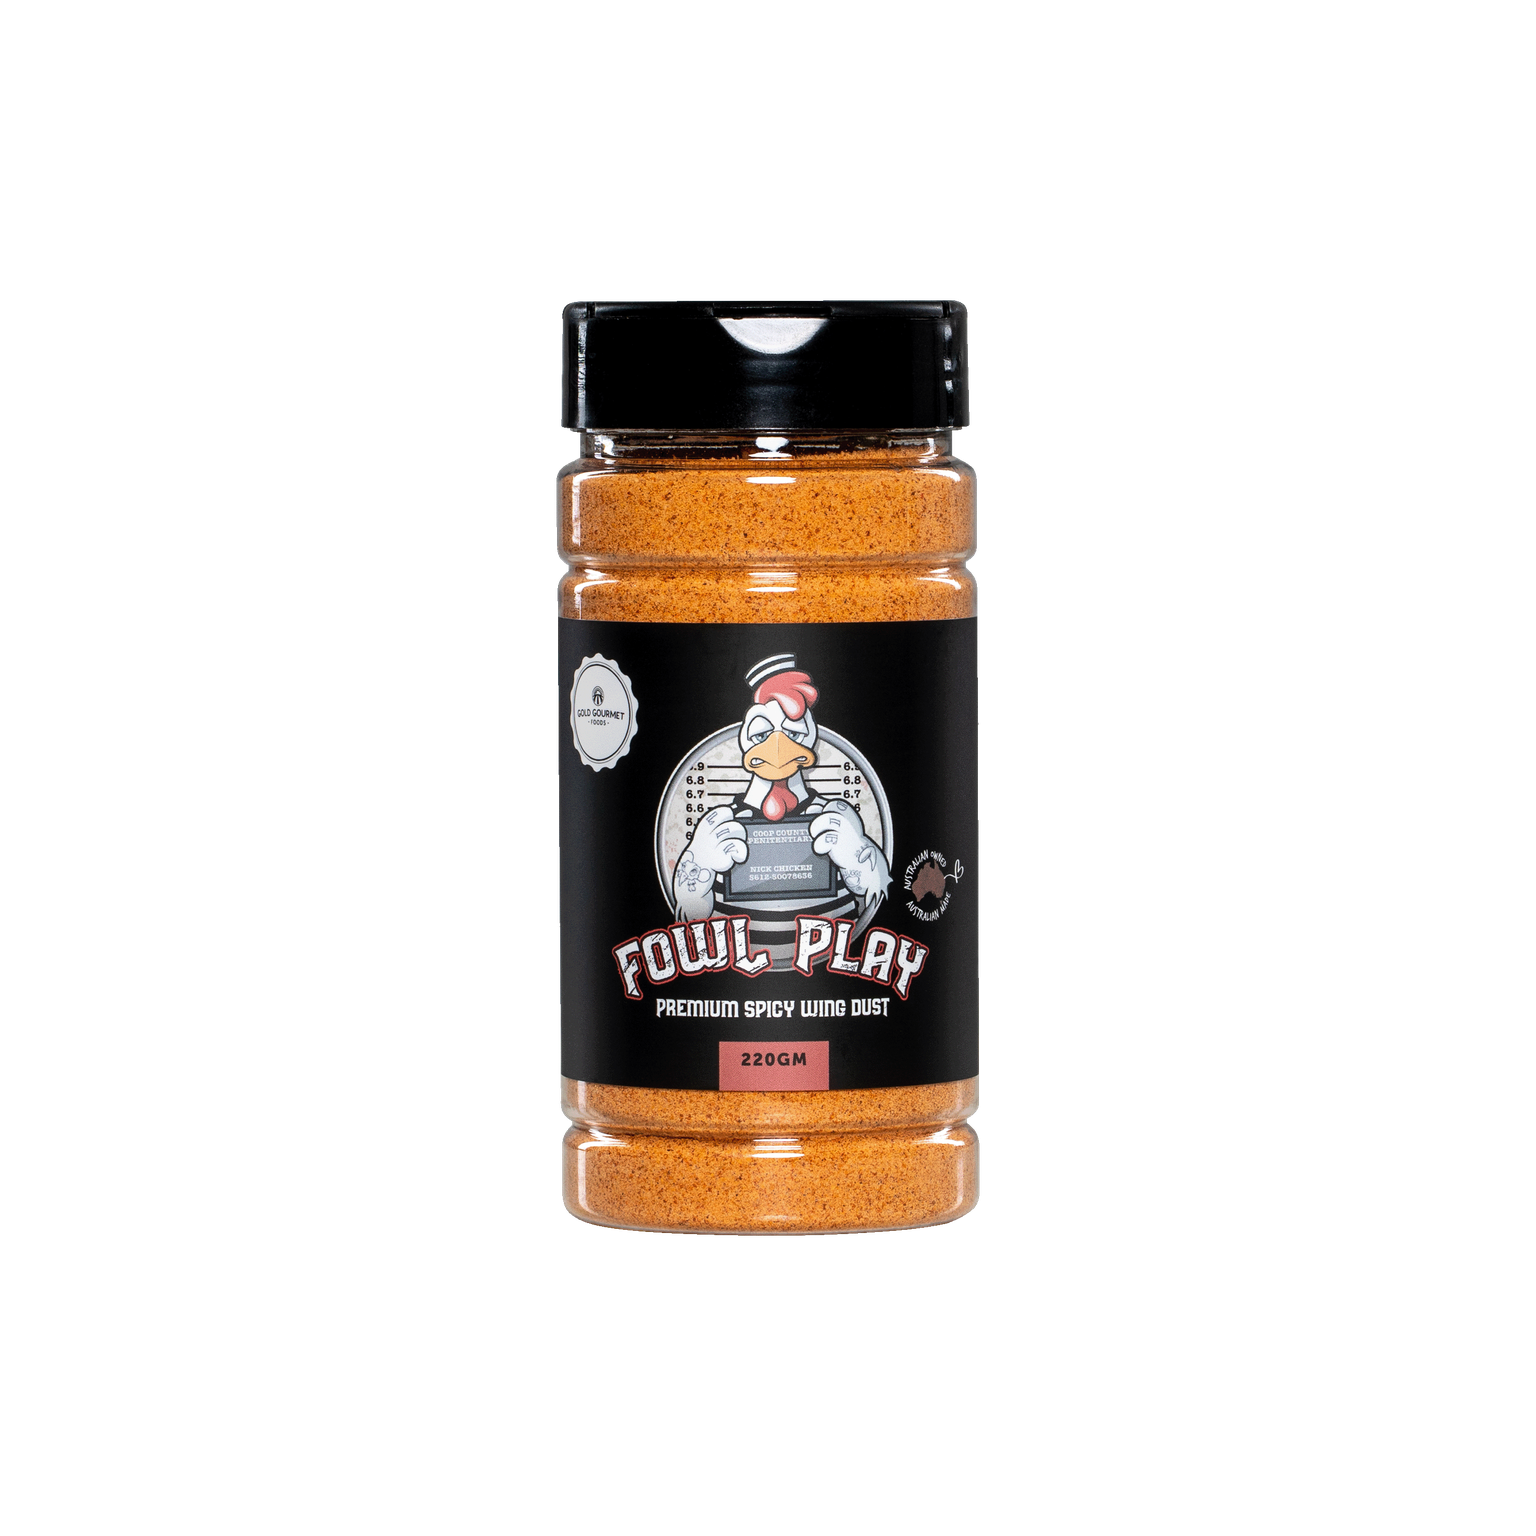 FOWL PLAY Premium Spicy Wing Dust 220g